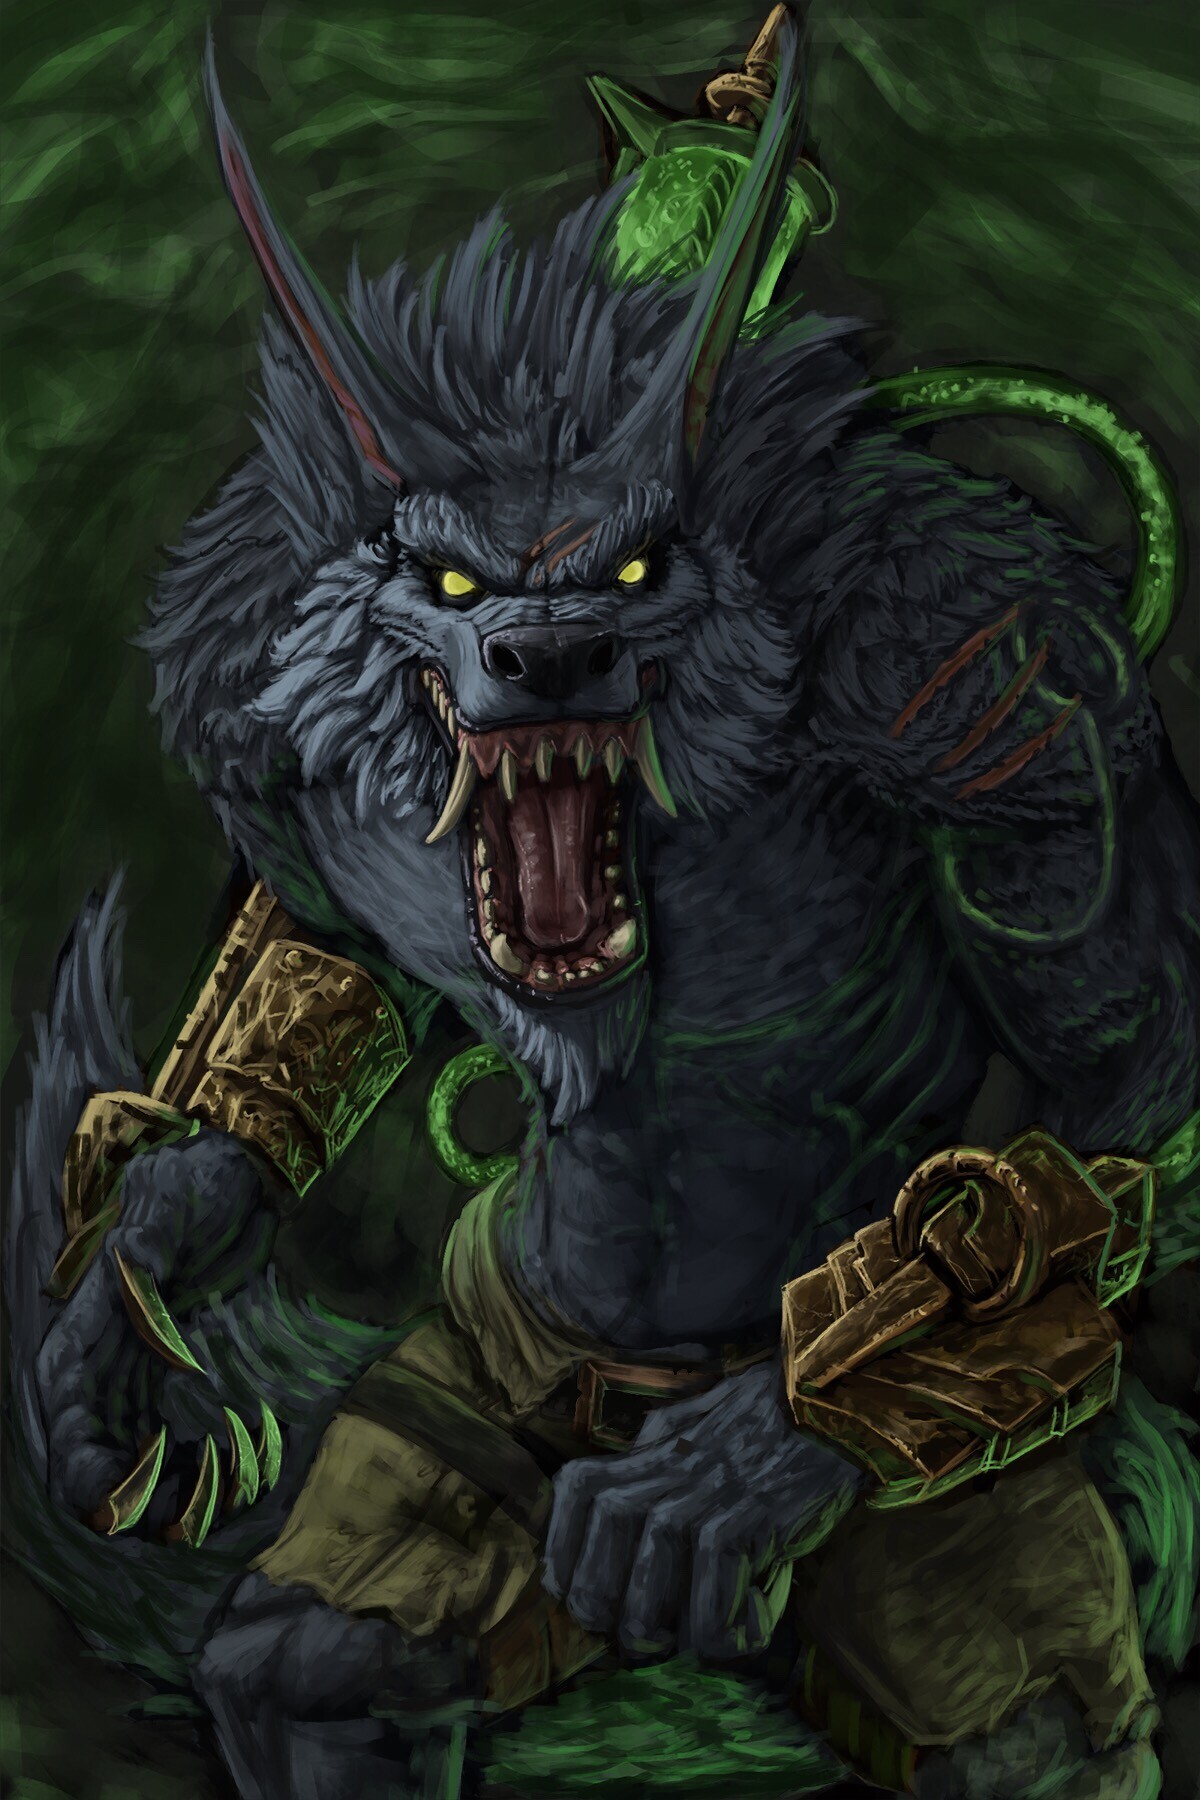 Fanart of Warwick from the game League of Legends.